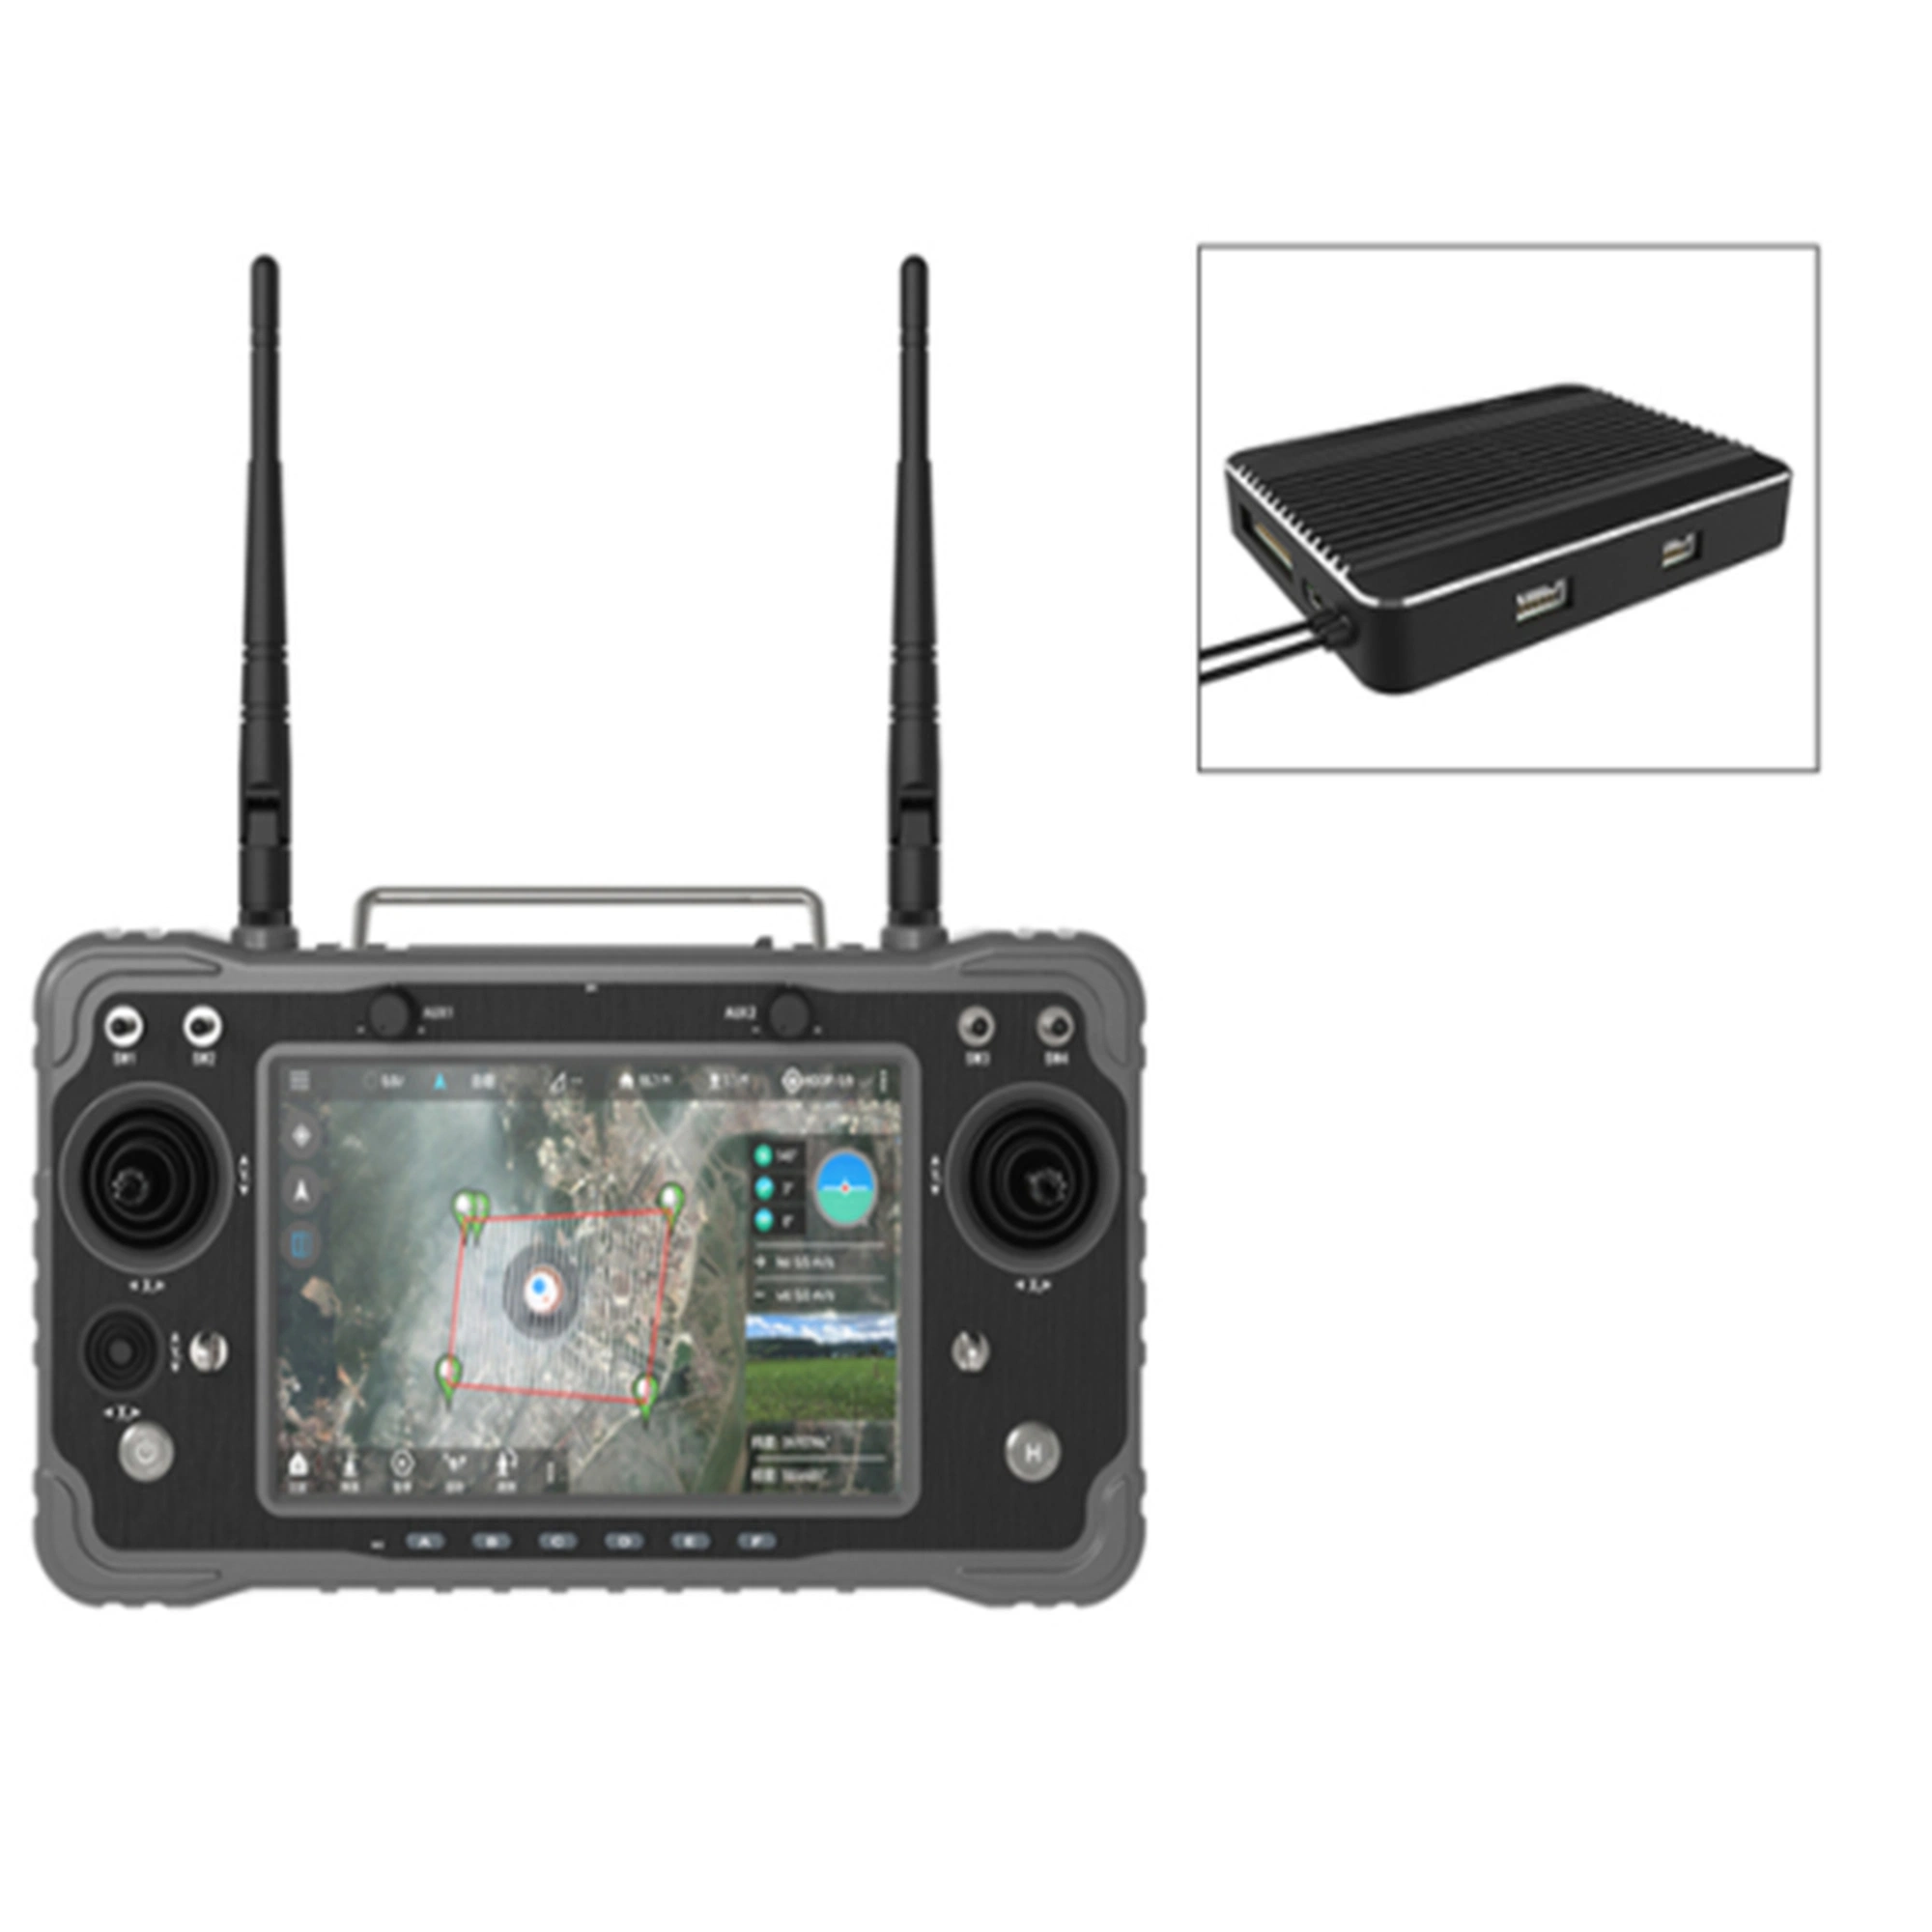 Ground Control Station Manufacturer Skydroid H16 Rx 2.4GHz 16CH 1080P Video Data Transmission Receiver Drone Remote Control Ground Station for Industrial Uav